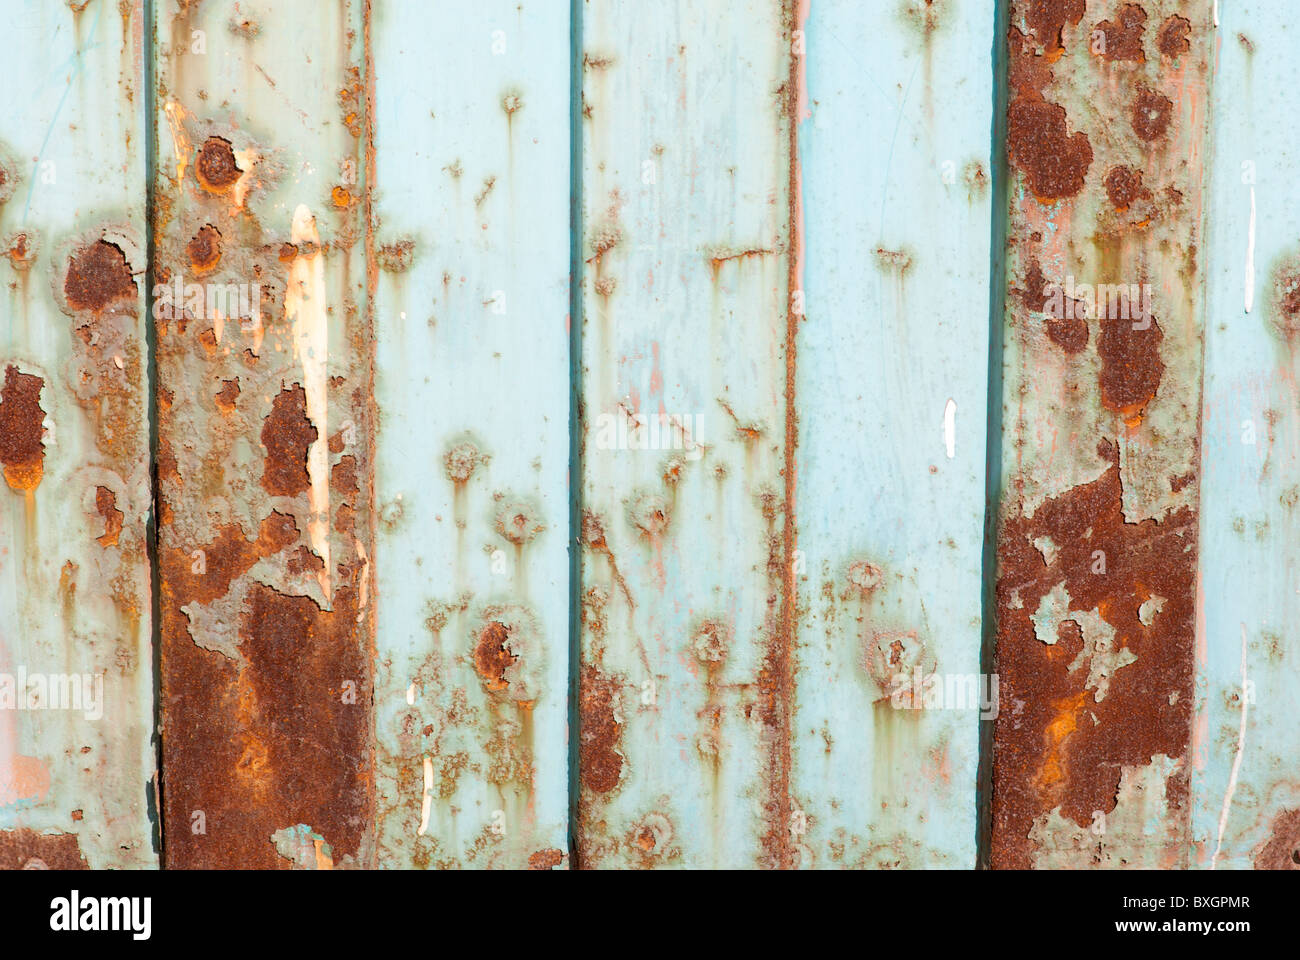 heavily rusted metal fence Stock Photo